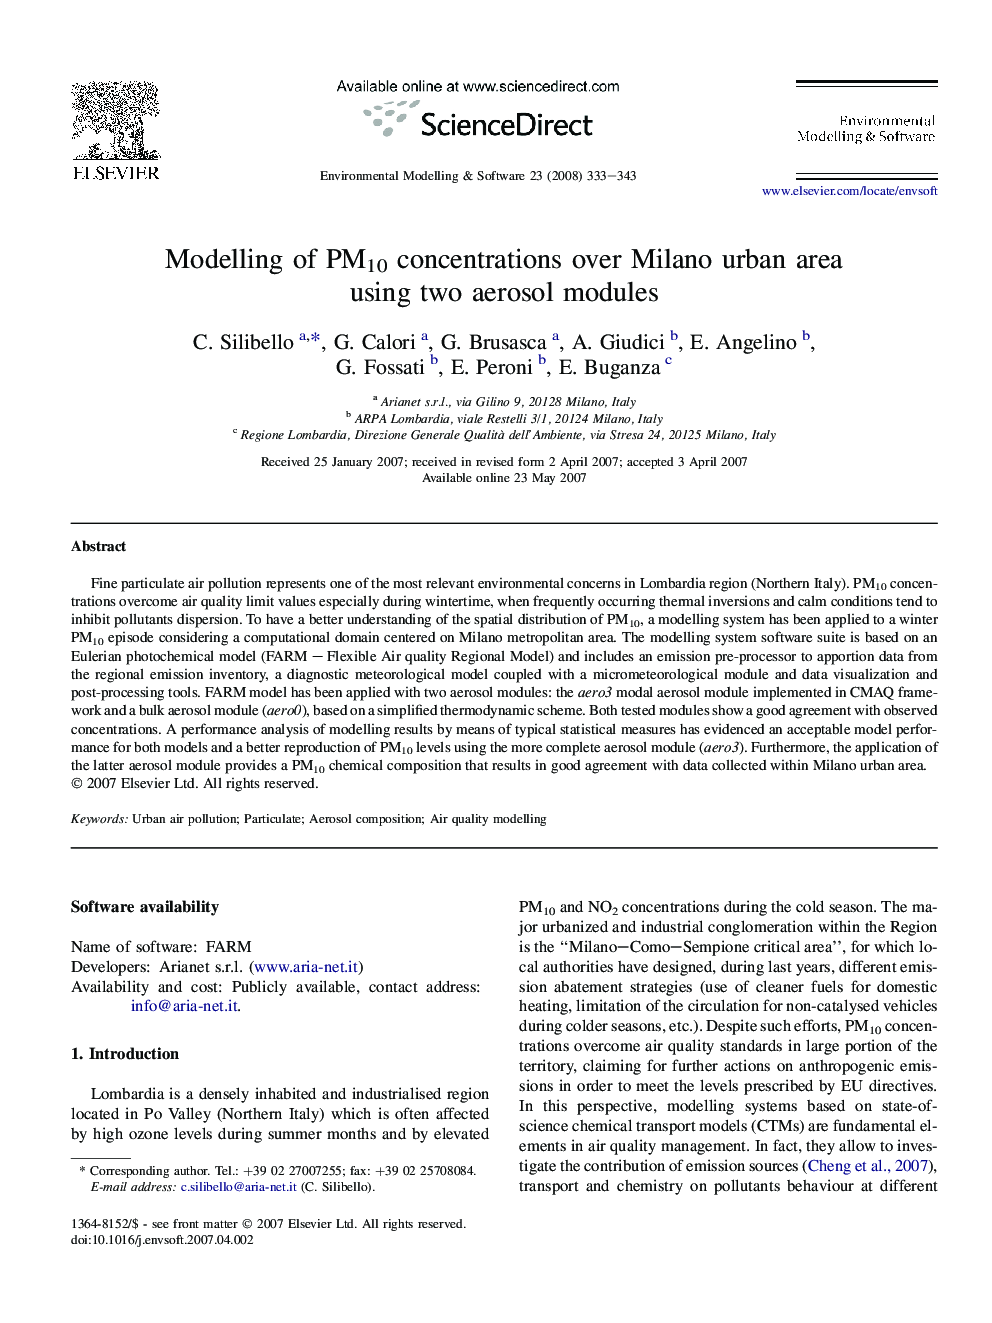 Modelling of PM10 concentrations over Milano urban area using two aerosol modules